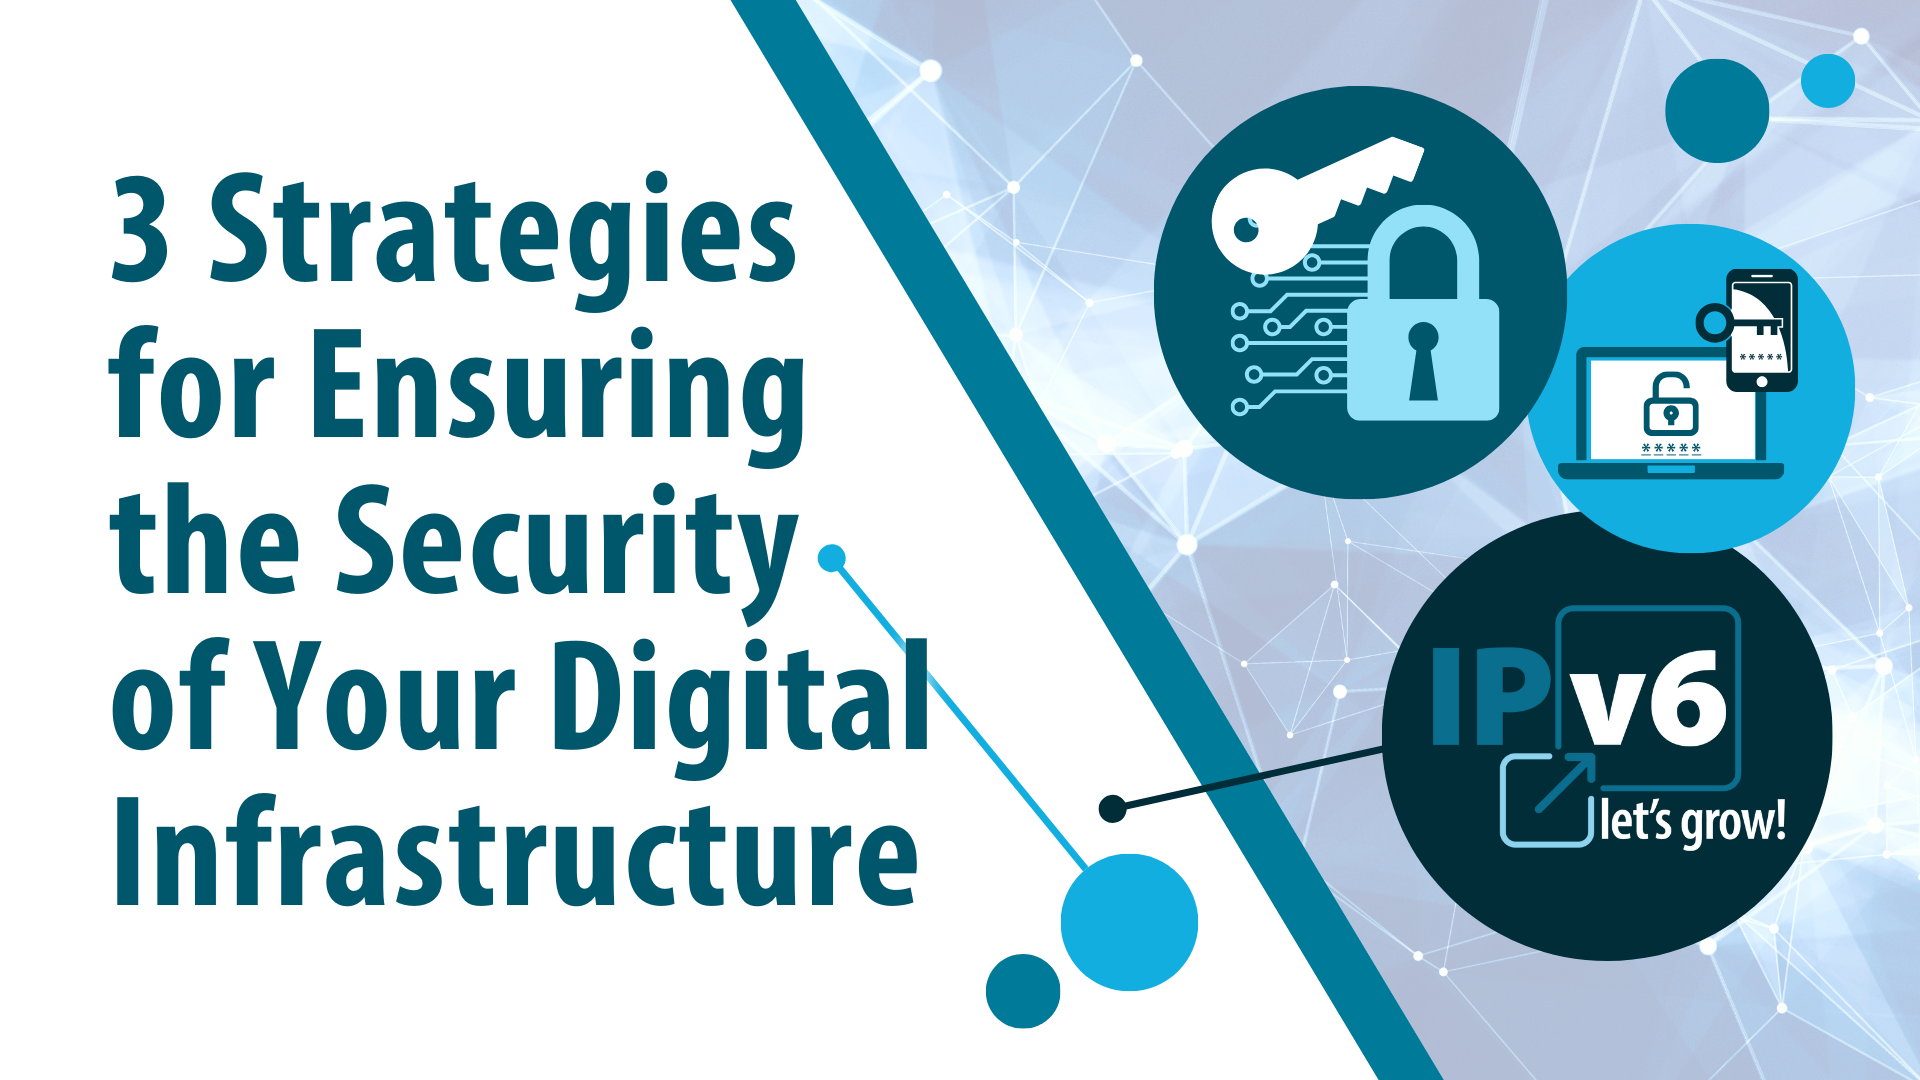 3 Strategies for Ensuring the Security of Your Digital Infrastructure 